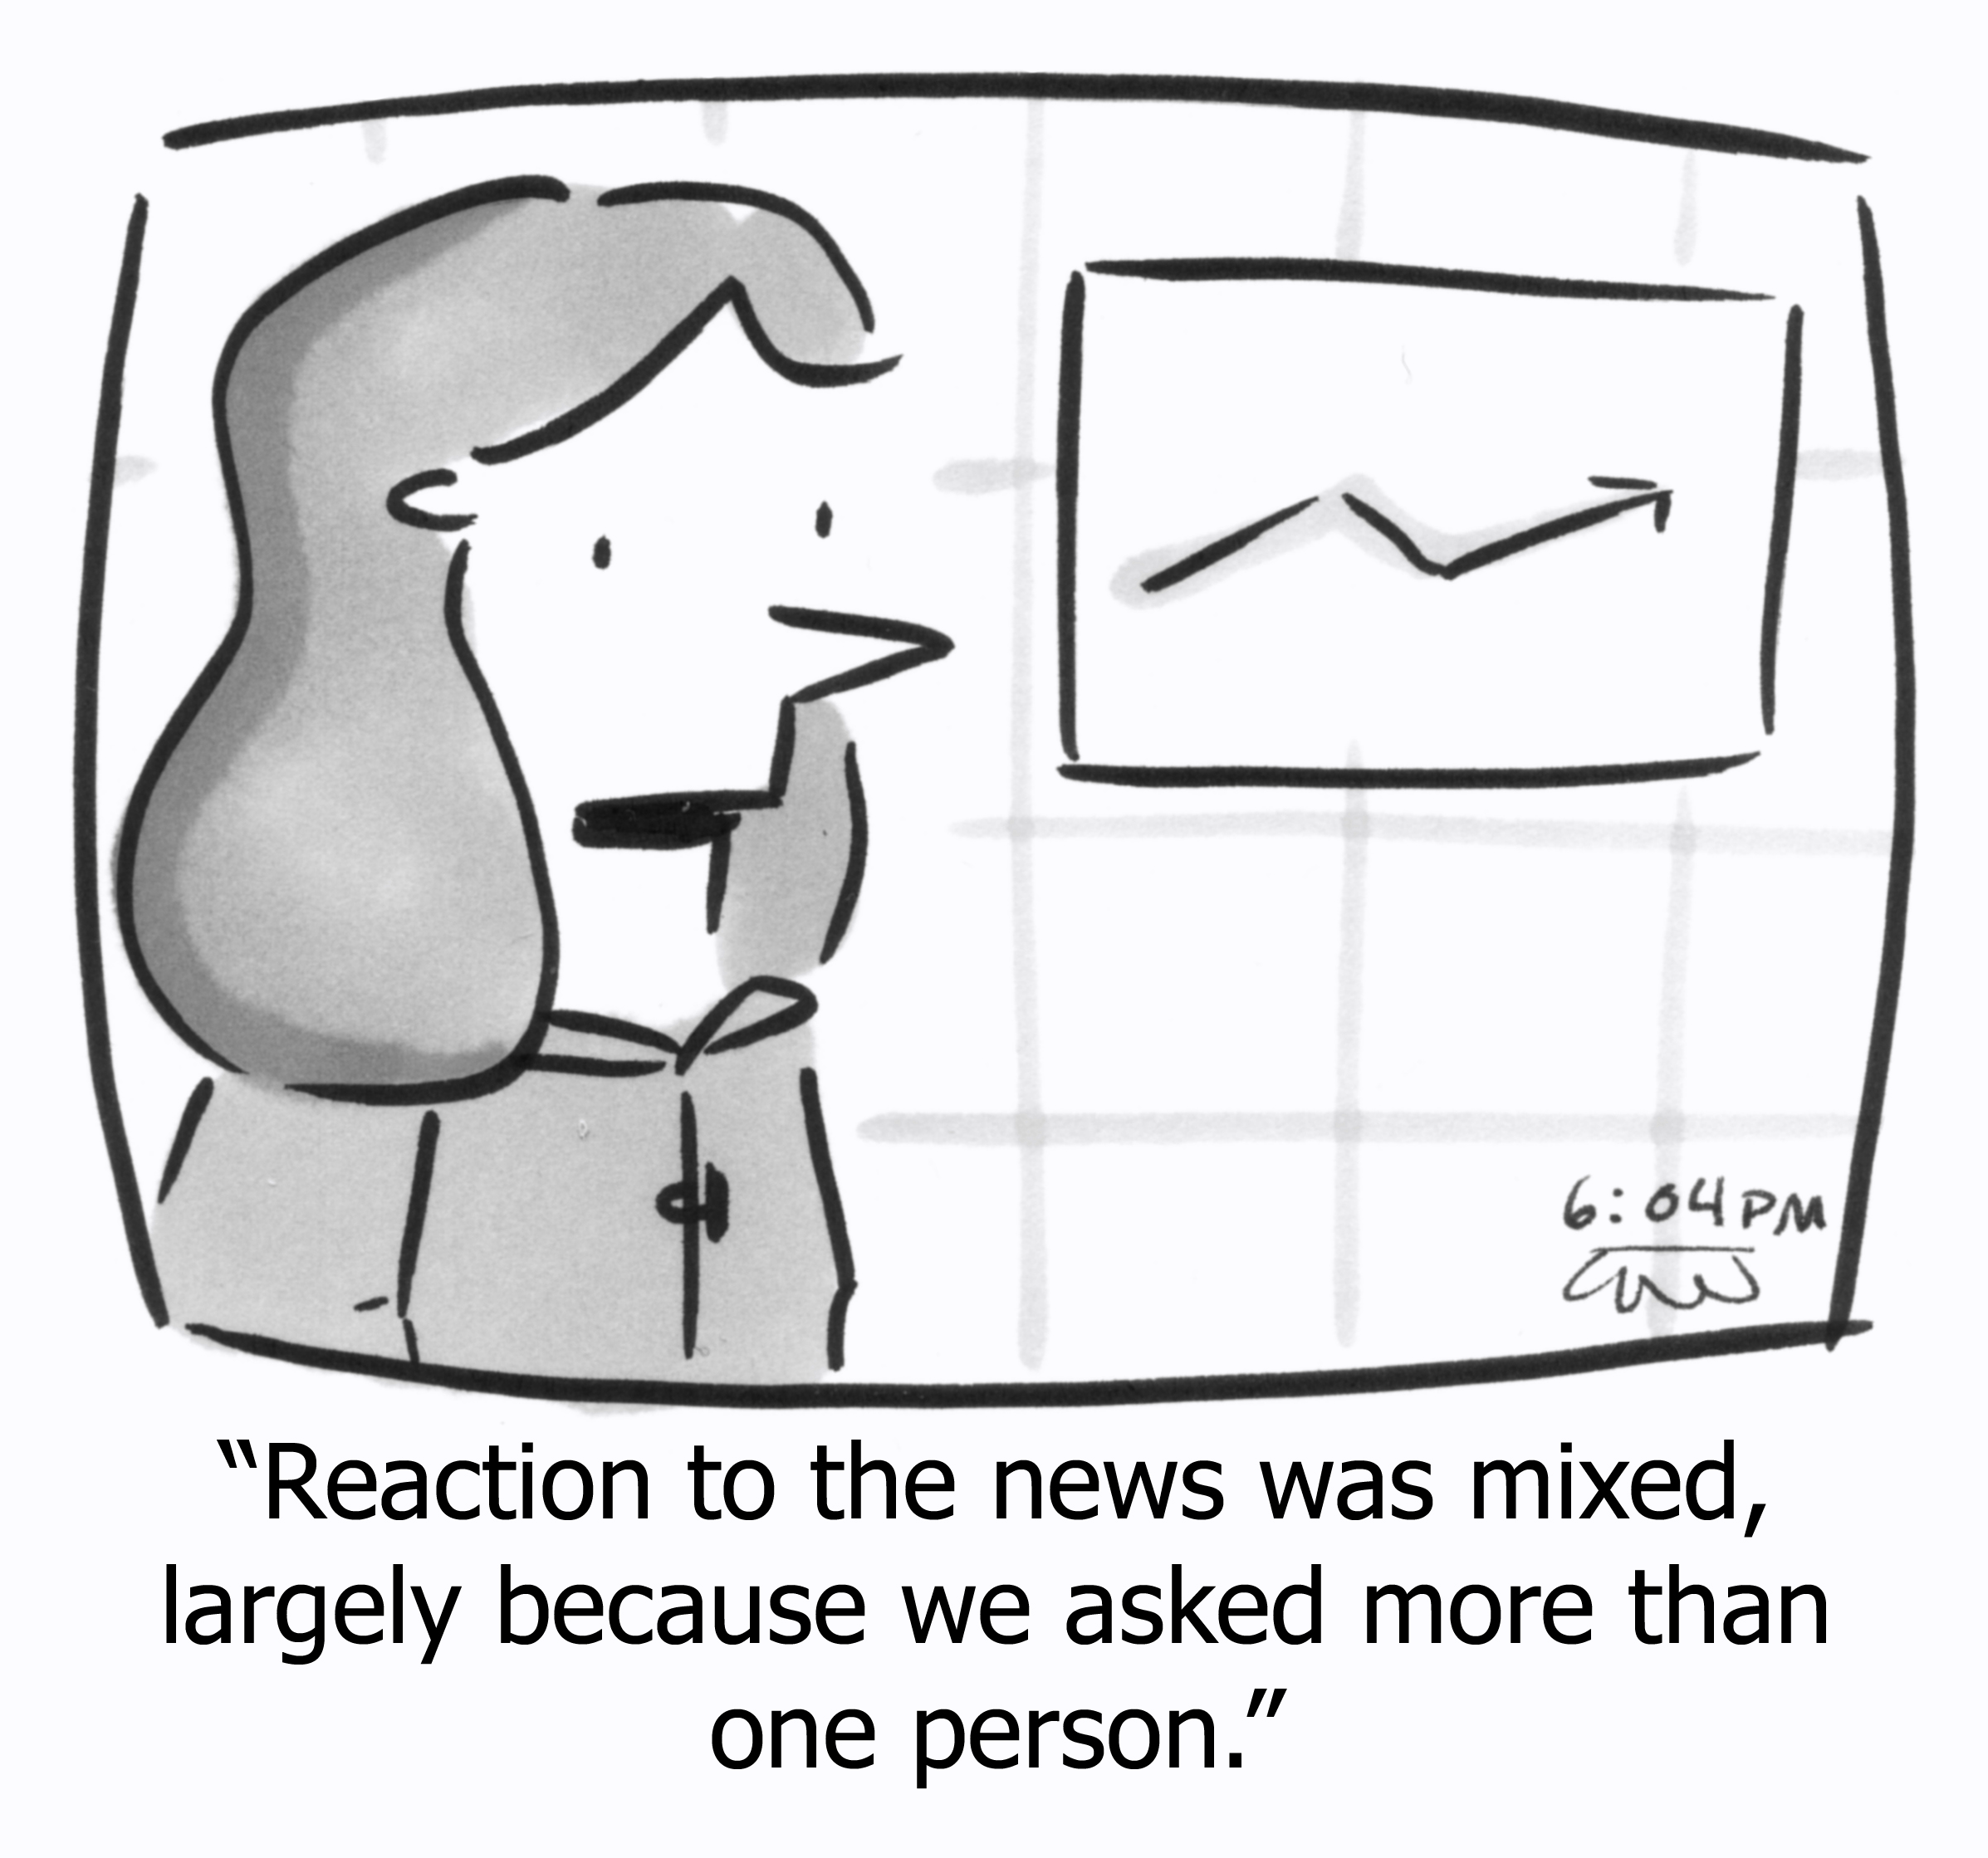 Reaction to the news was mixed, largely because we asked more than one person.